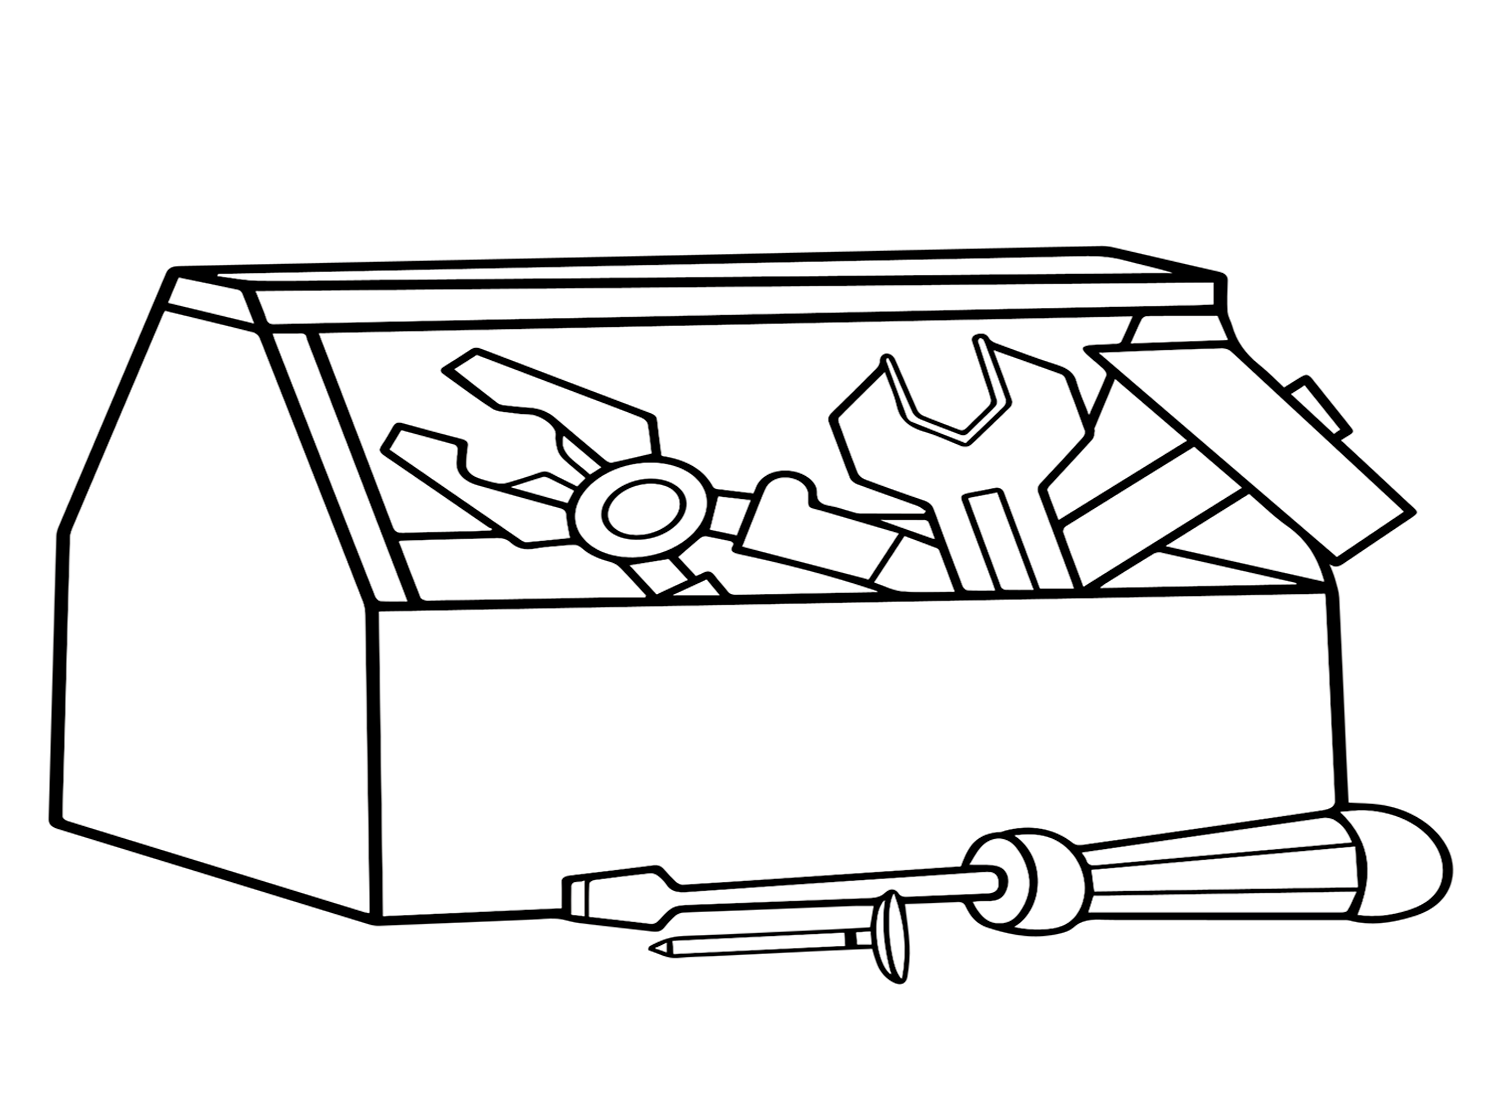 Toolbox and Wrench Coloring Page